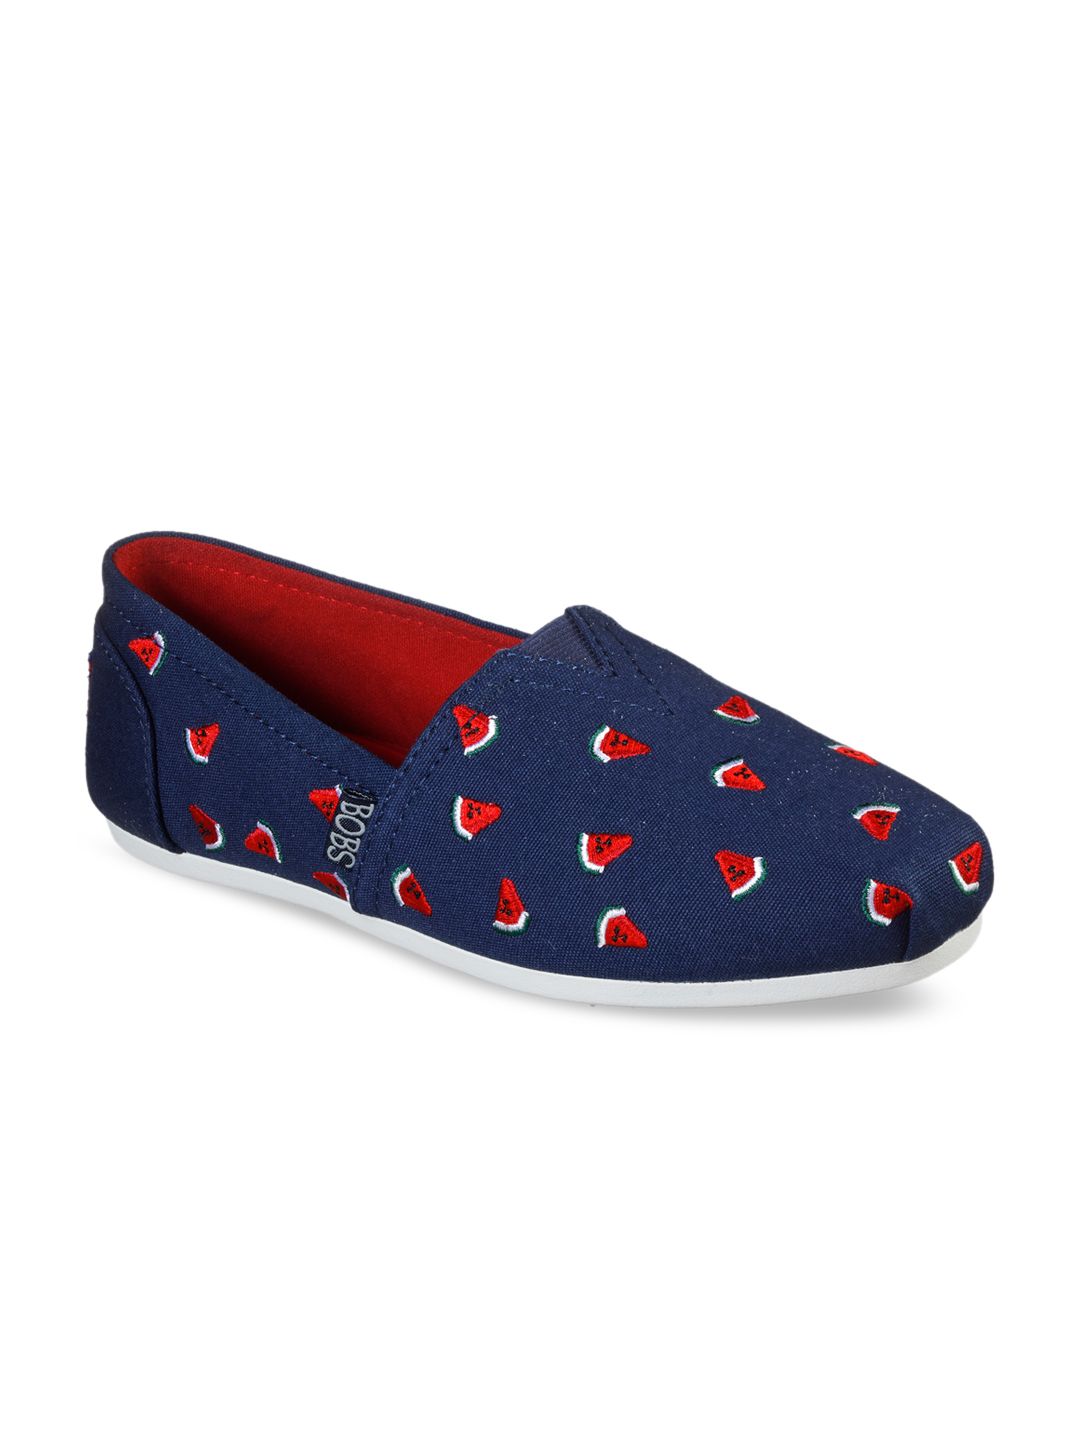 Skechers Women Navy Blue Printed Casual BOBS PLUSH-SELLIN'MELON Shoes Price in India